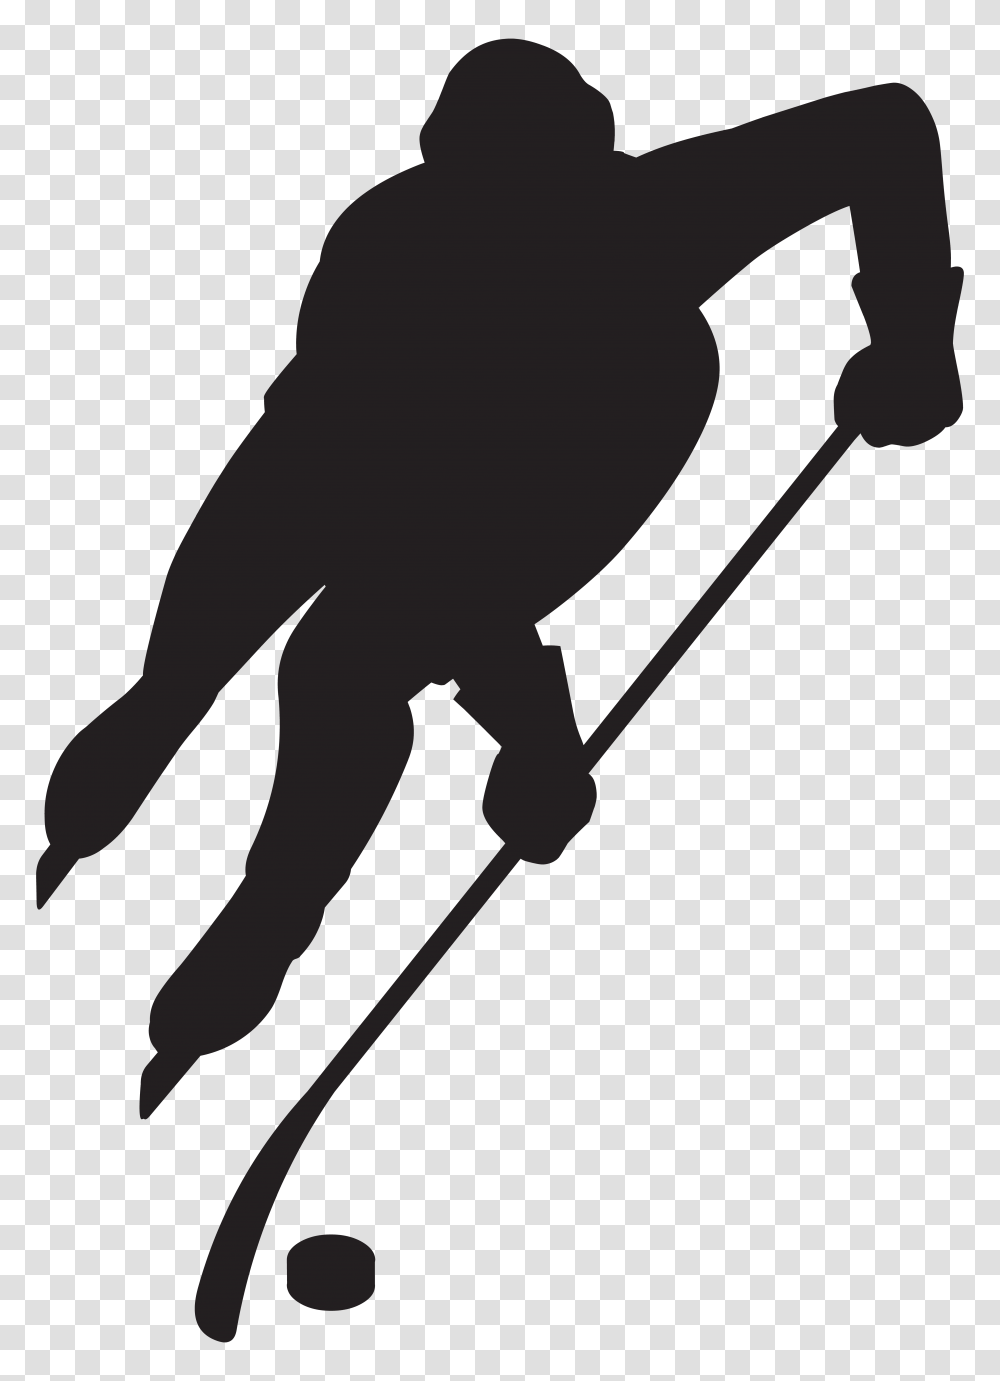 Hockey Player Silhouette Clip Art Gallery, Cross, Logo Transparent Png